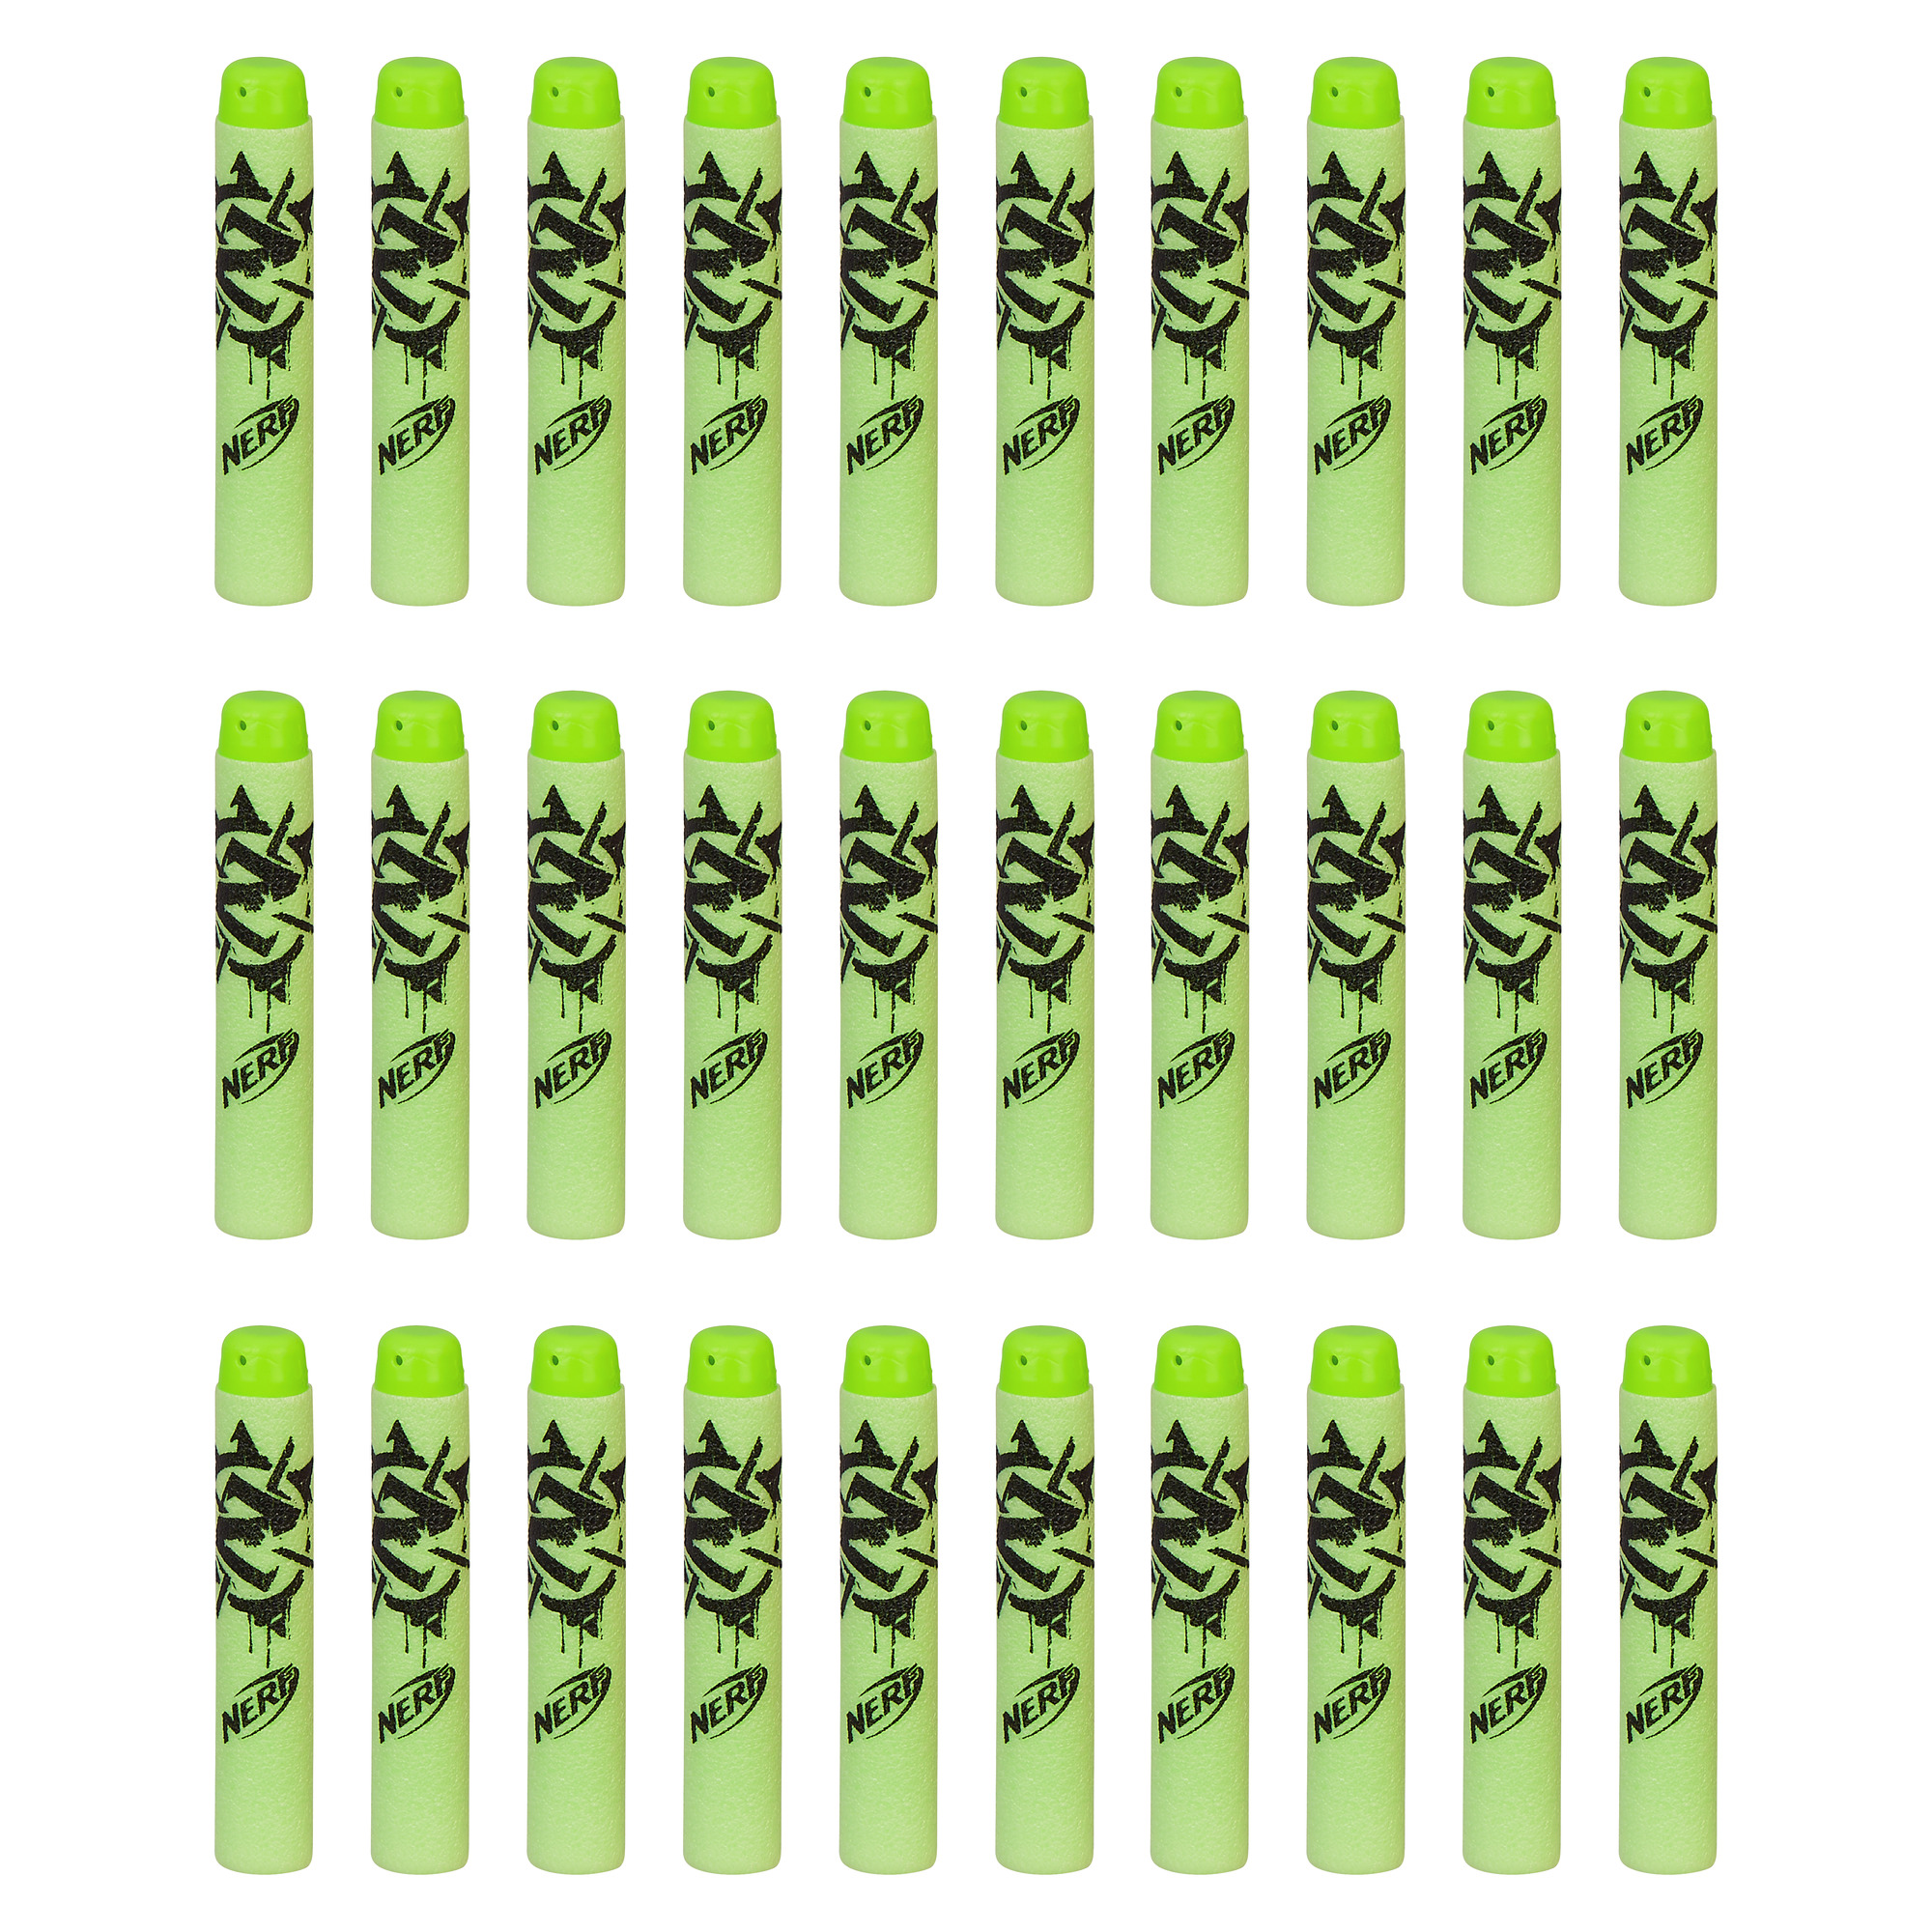 Official Nerf Zombie Strike 30-Dart Refill Pack - image 2 of 3